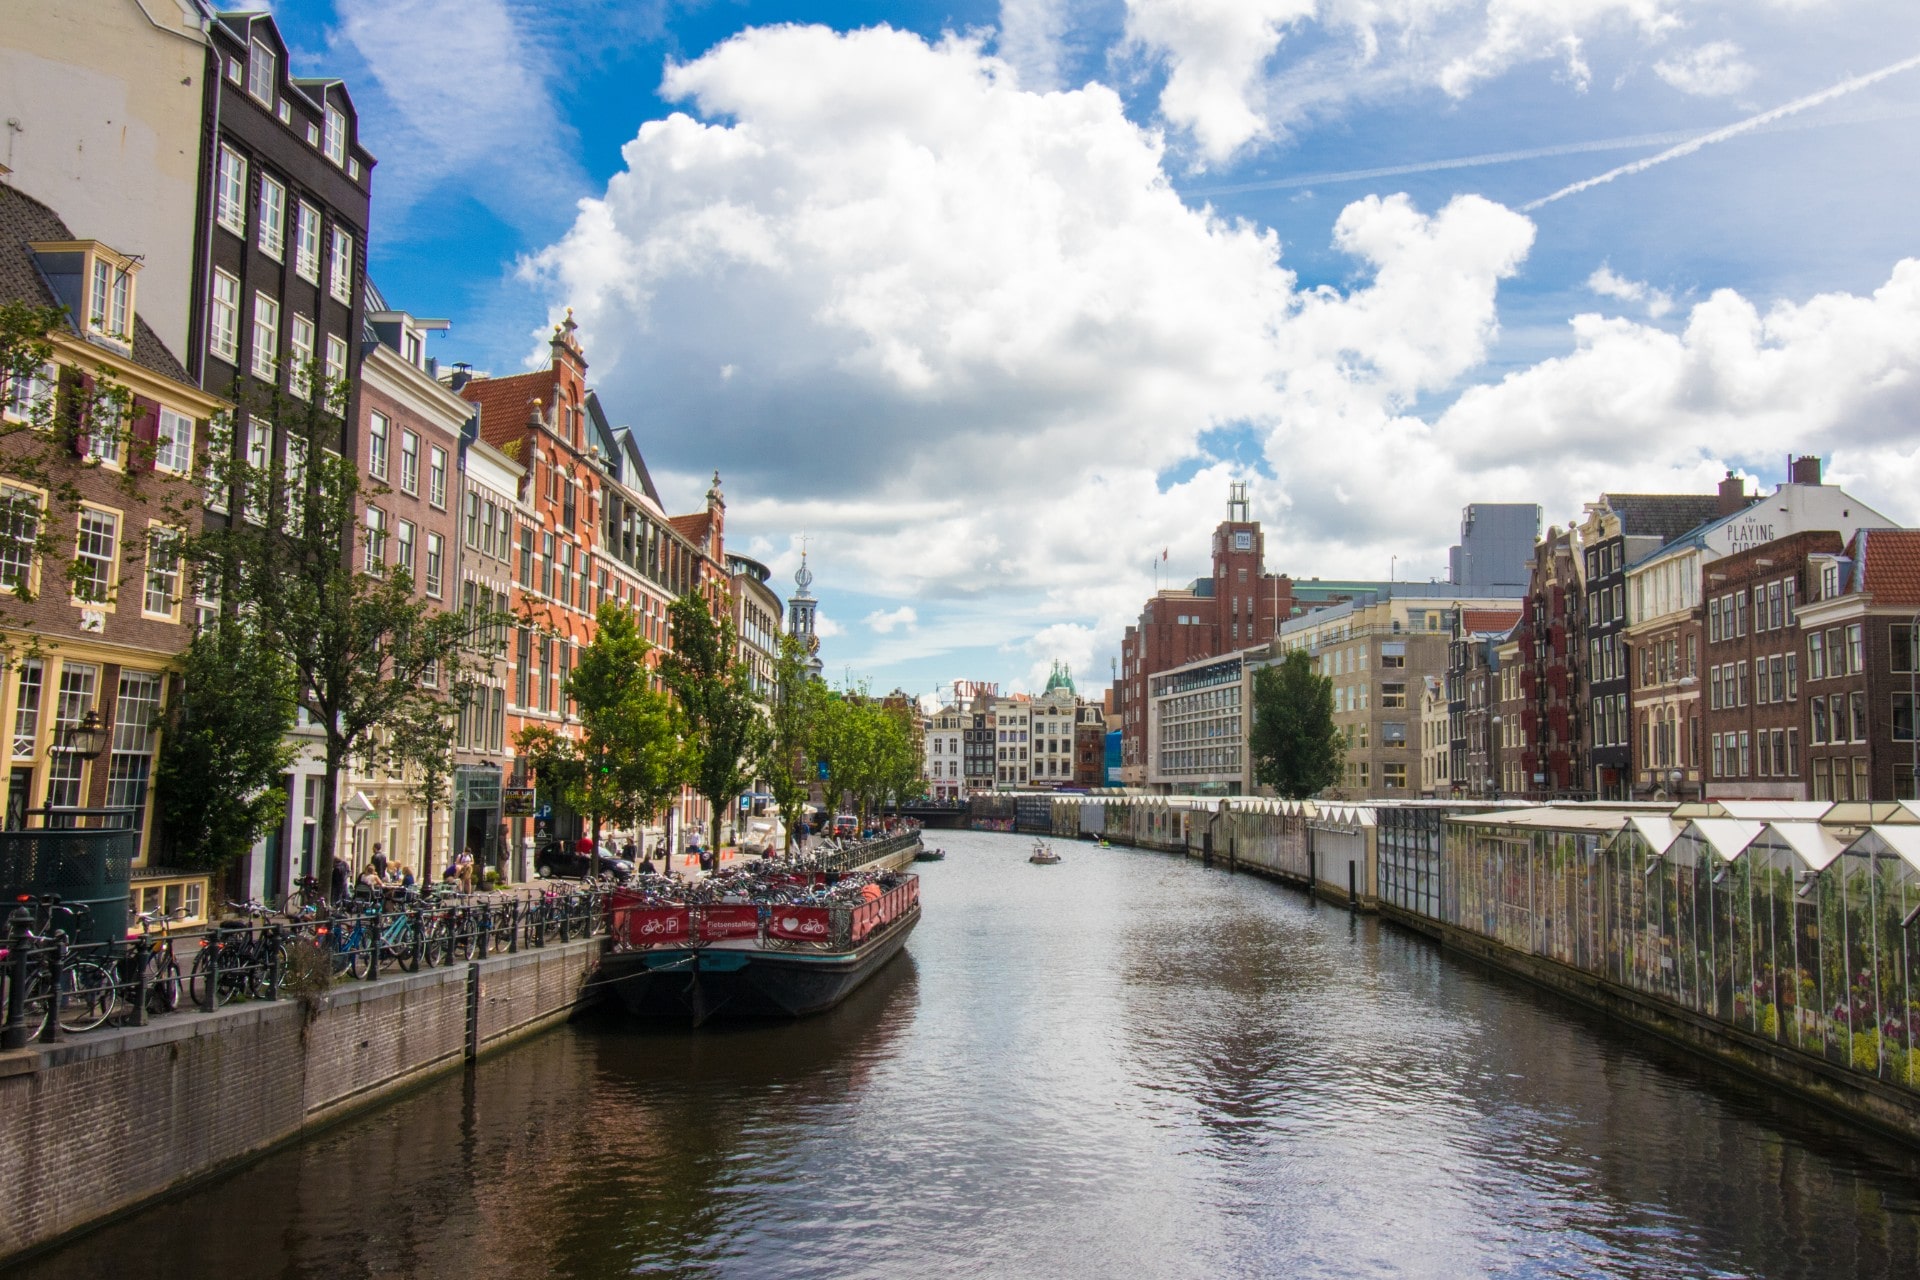 river-running-through-european-city-canal-with-flower-markets-and-buildings-on-either-side-on-a-hot-summers-day-2-day-amsterdam-itinerary